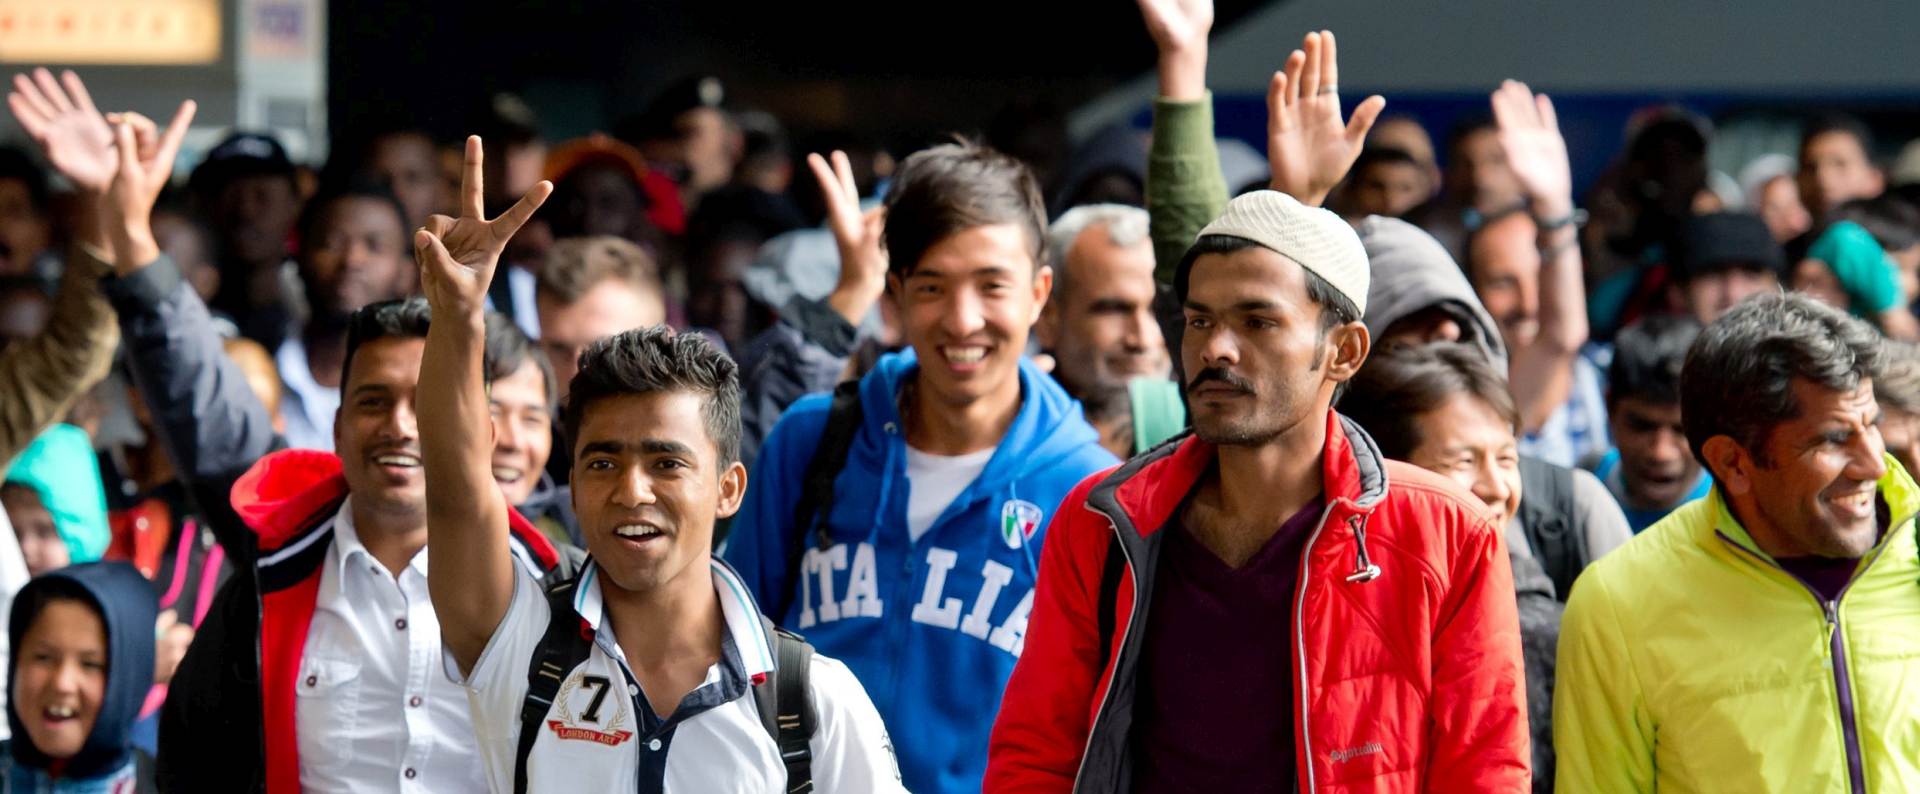 epaselect epa04917129 Refugees cheer as they arrive at the main train station in Munich, Germany, 06 September 2015. Thousands more exhausted refugees were setting foot in Germany for the second day 06 September after enduring grueling journeys across Hungary and Austria. Many of the refugees are fleeing war-torn countries such as Syria and Afghanistan, and thus qualify for international protection, but EU countries disagree on how to best handle the surge.  EPA/SVEN HOPPE